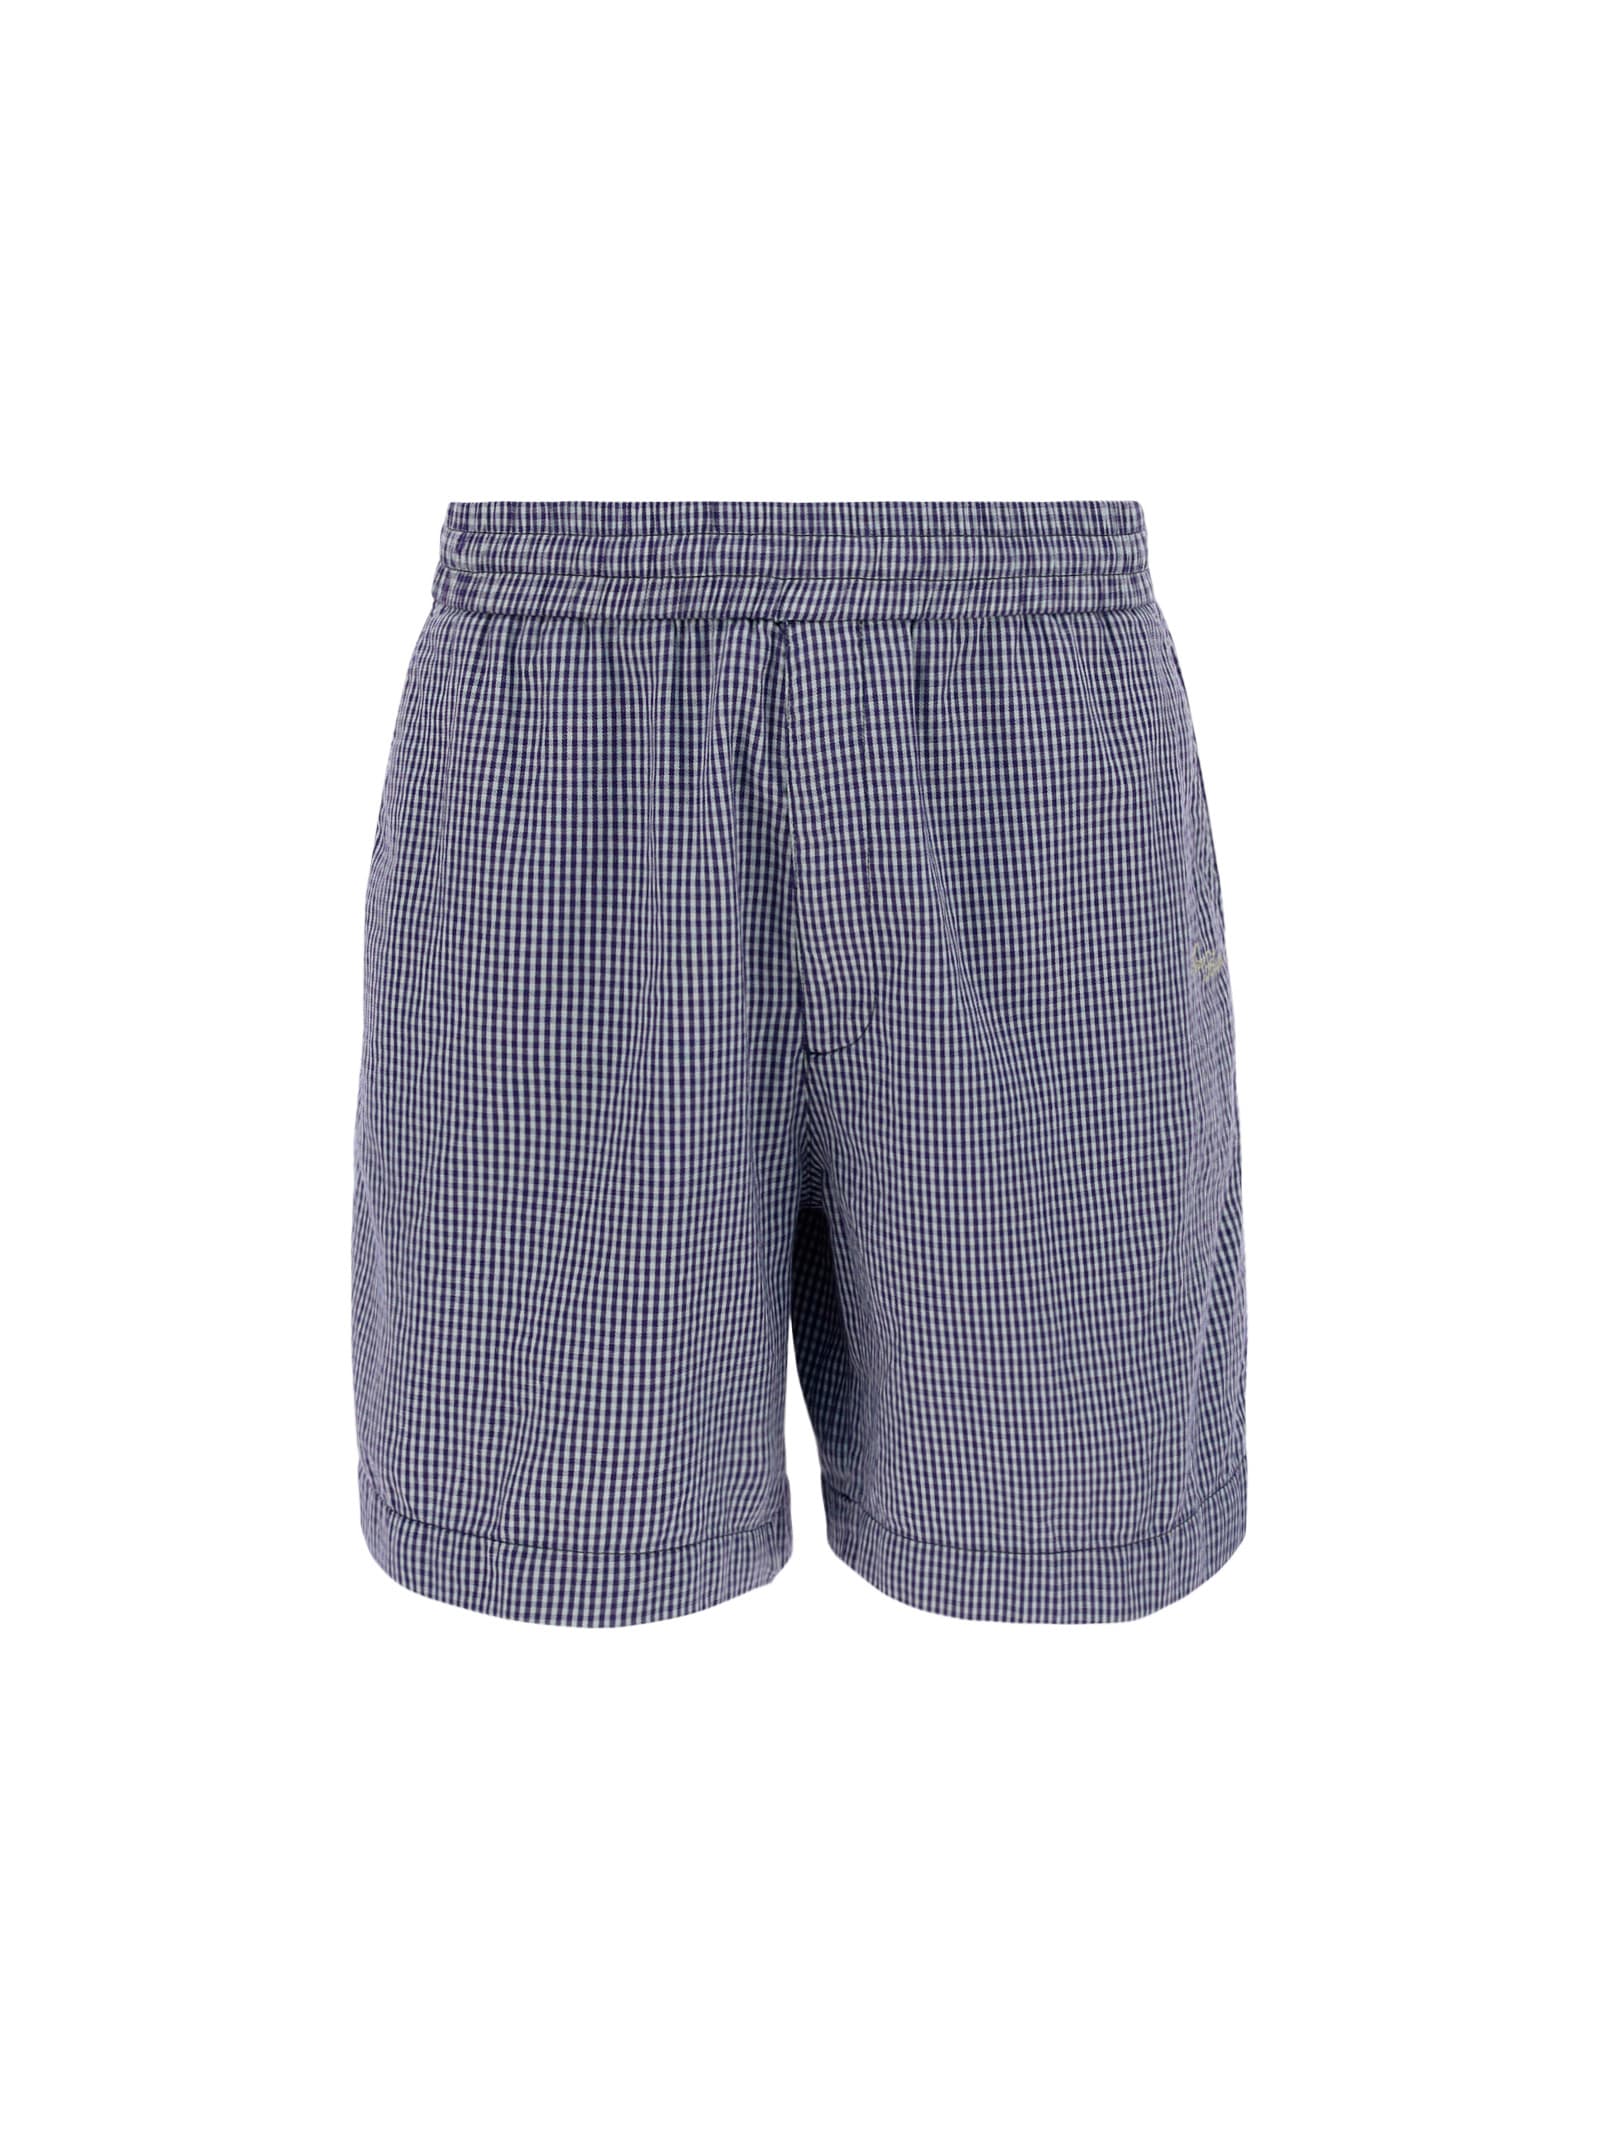 Acne Studios Shorts By Acne